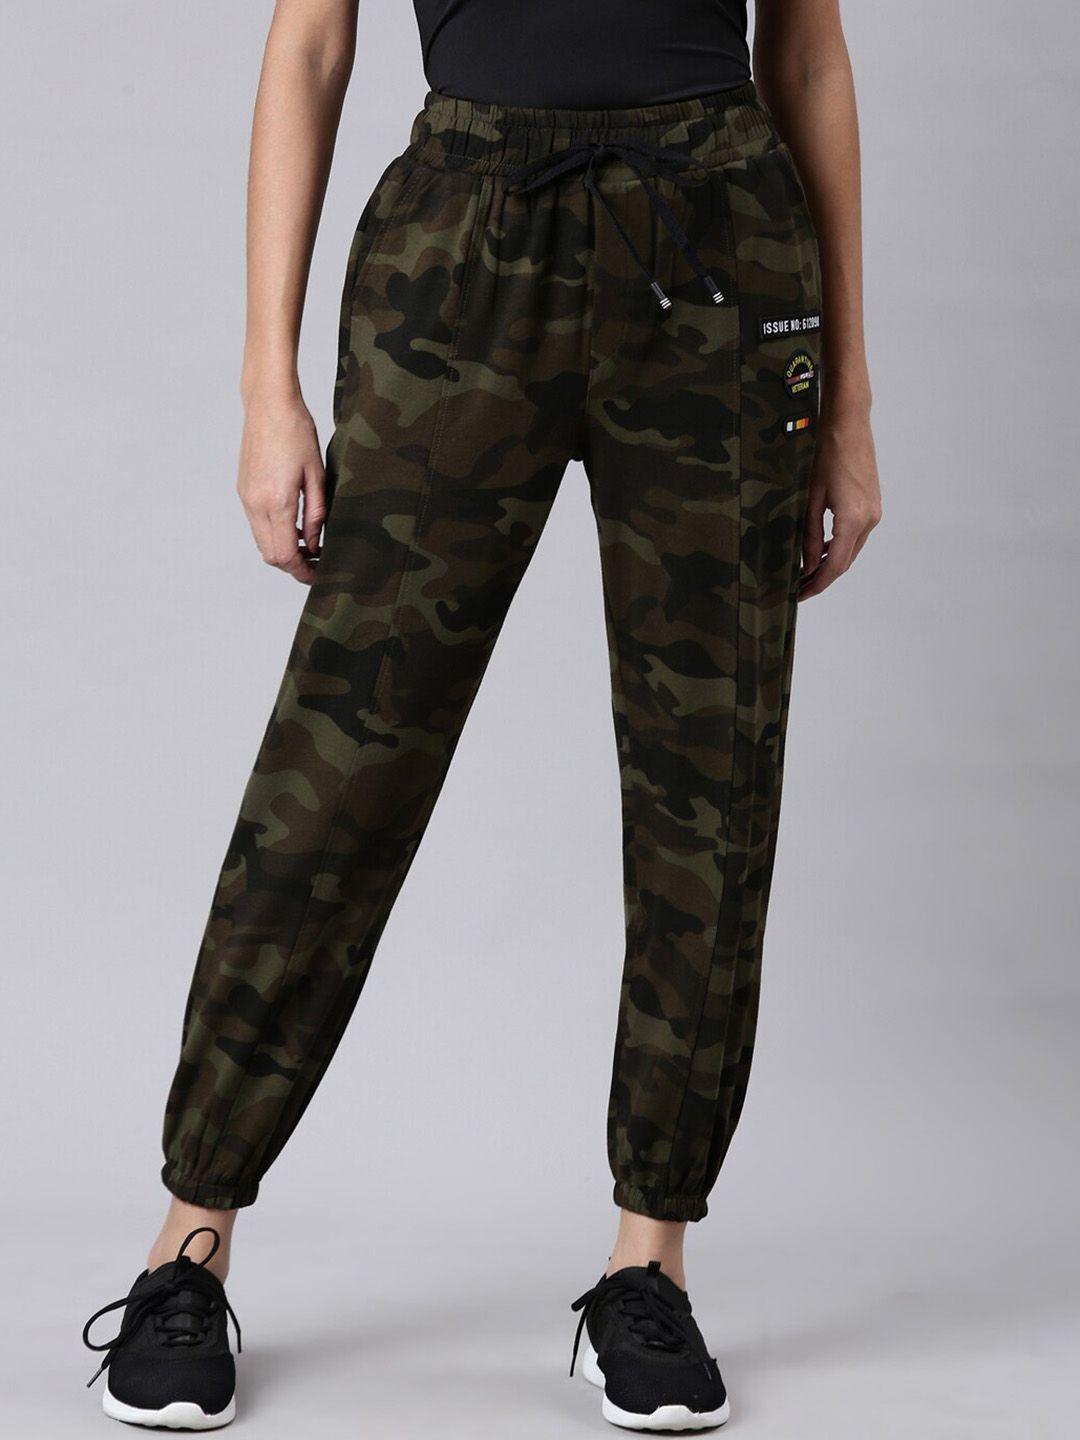 SHOWOFF Camouflage Printed Regular Fit Cotton Jogger